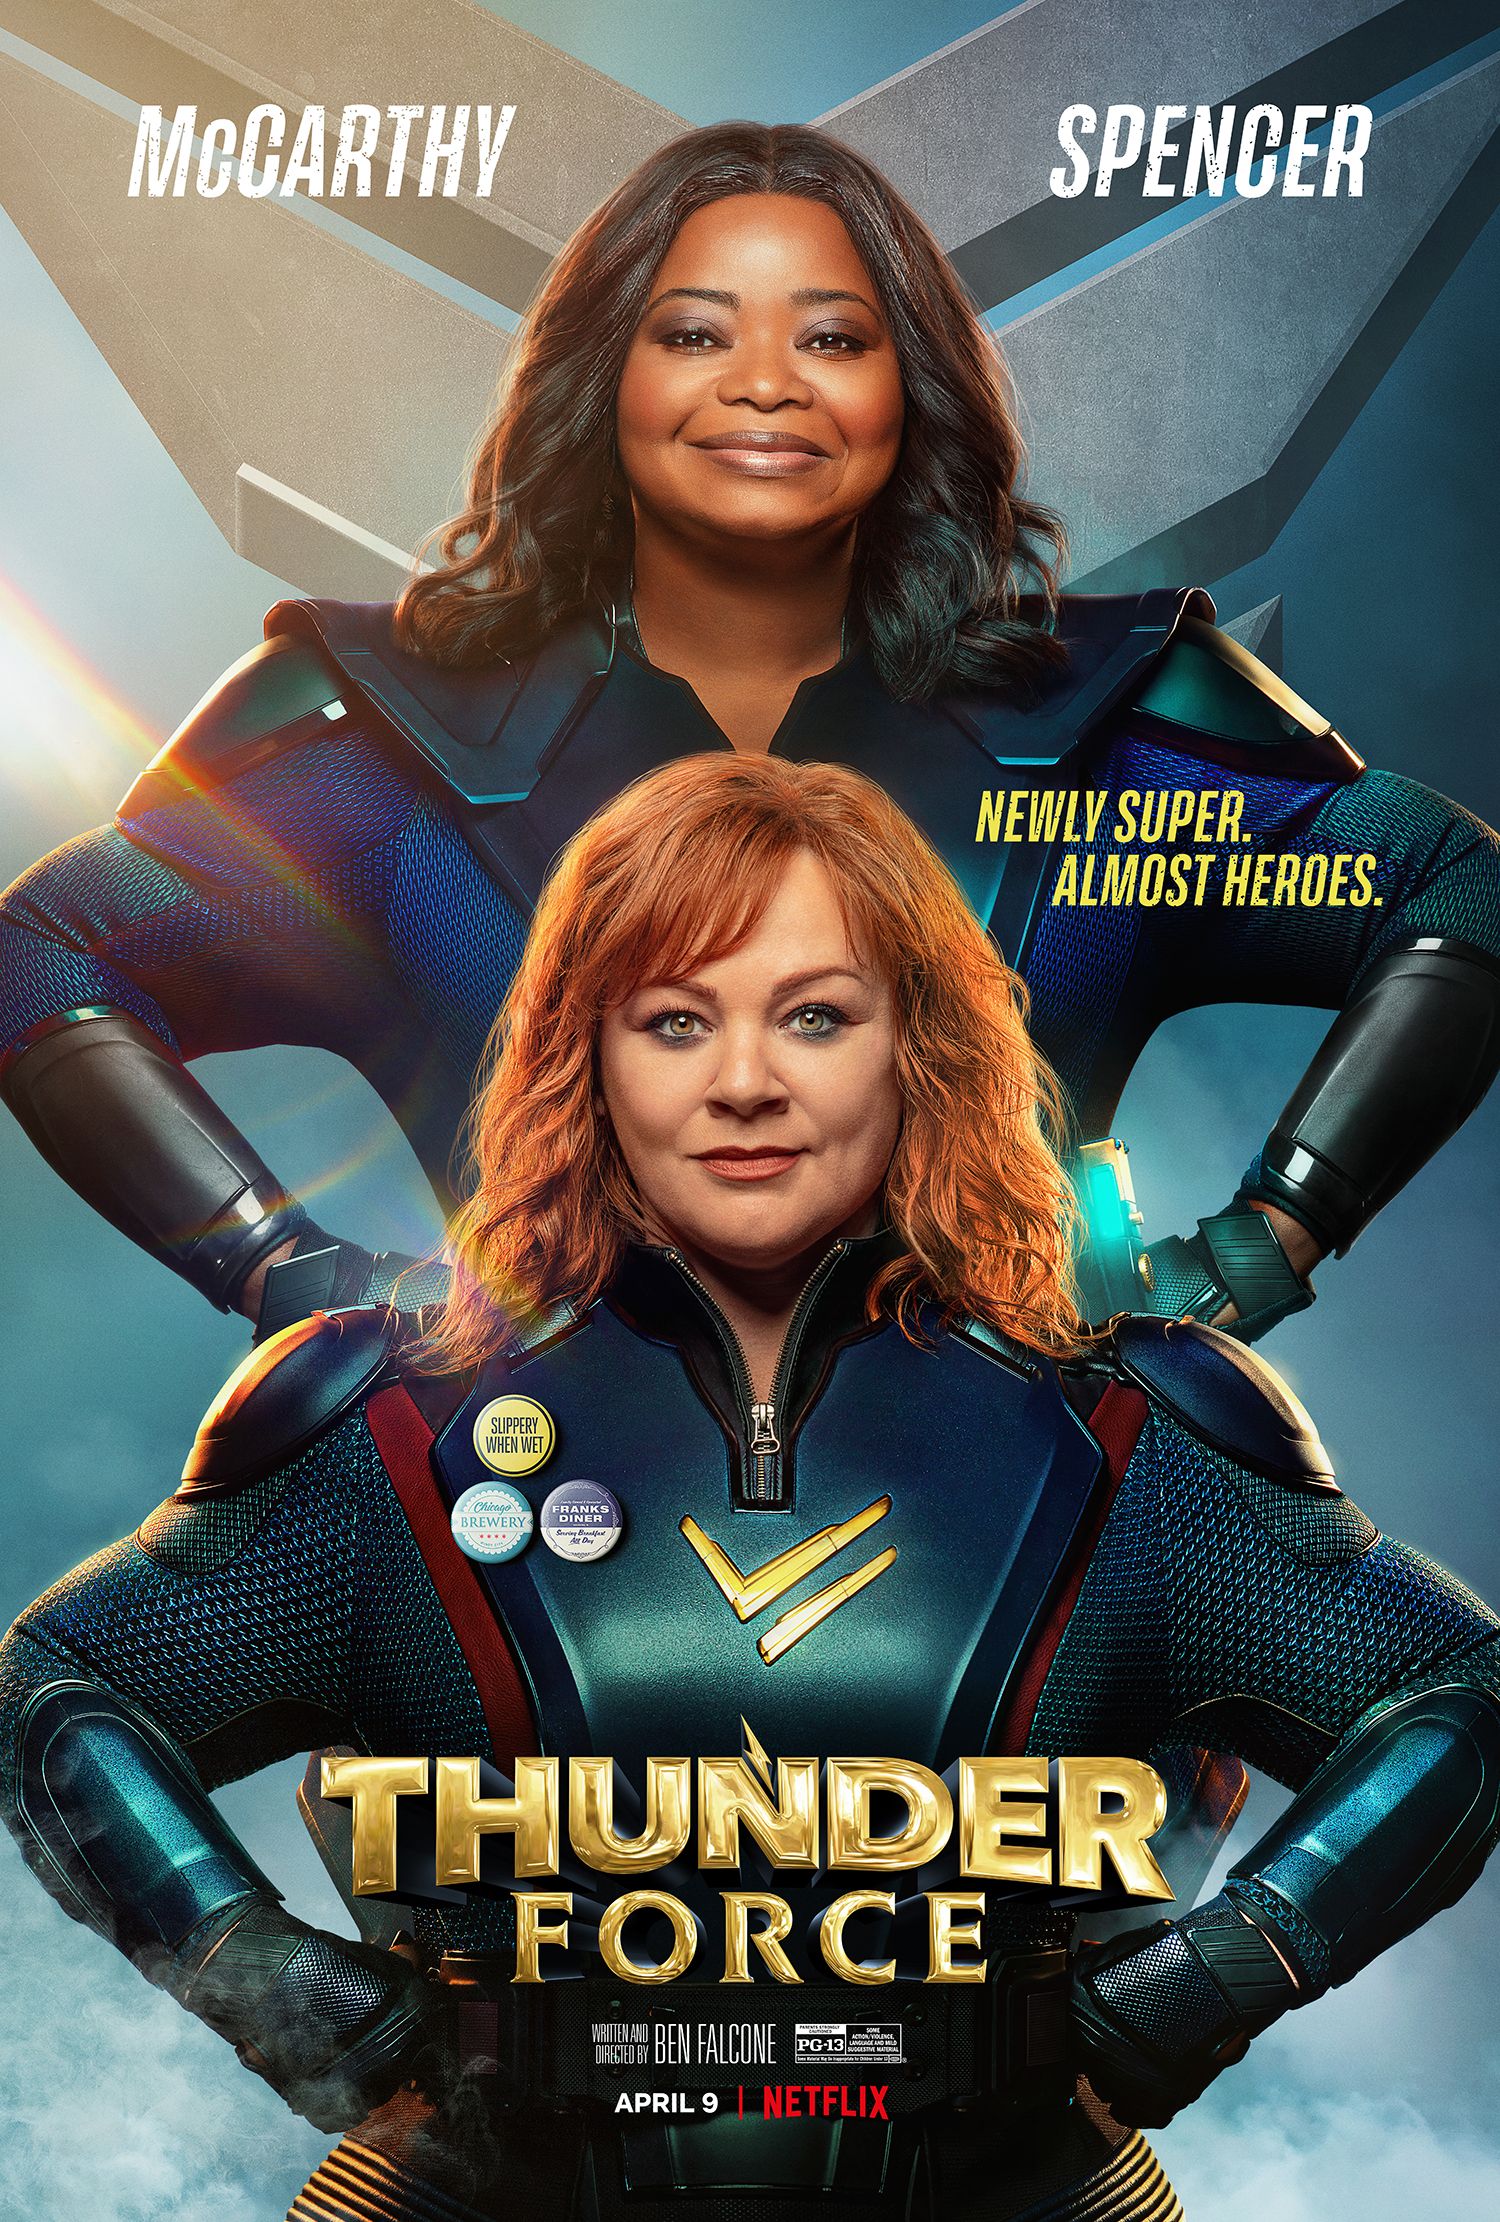 Melissa McCarthy and Octavia Spencer pose in Thunder Force Film Poster